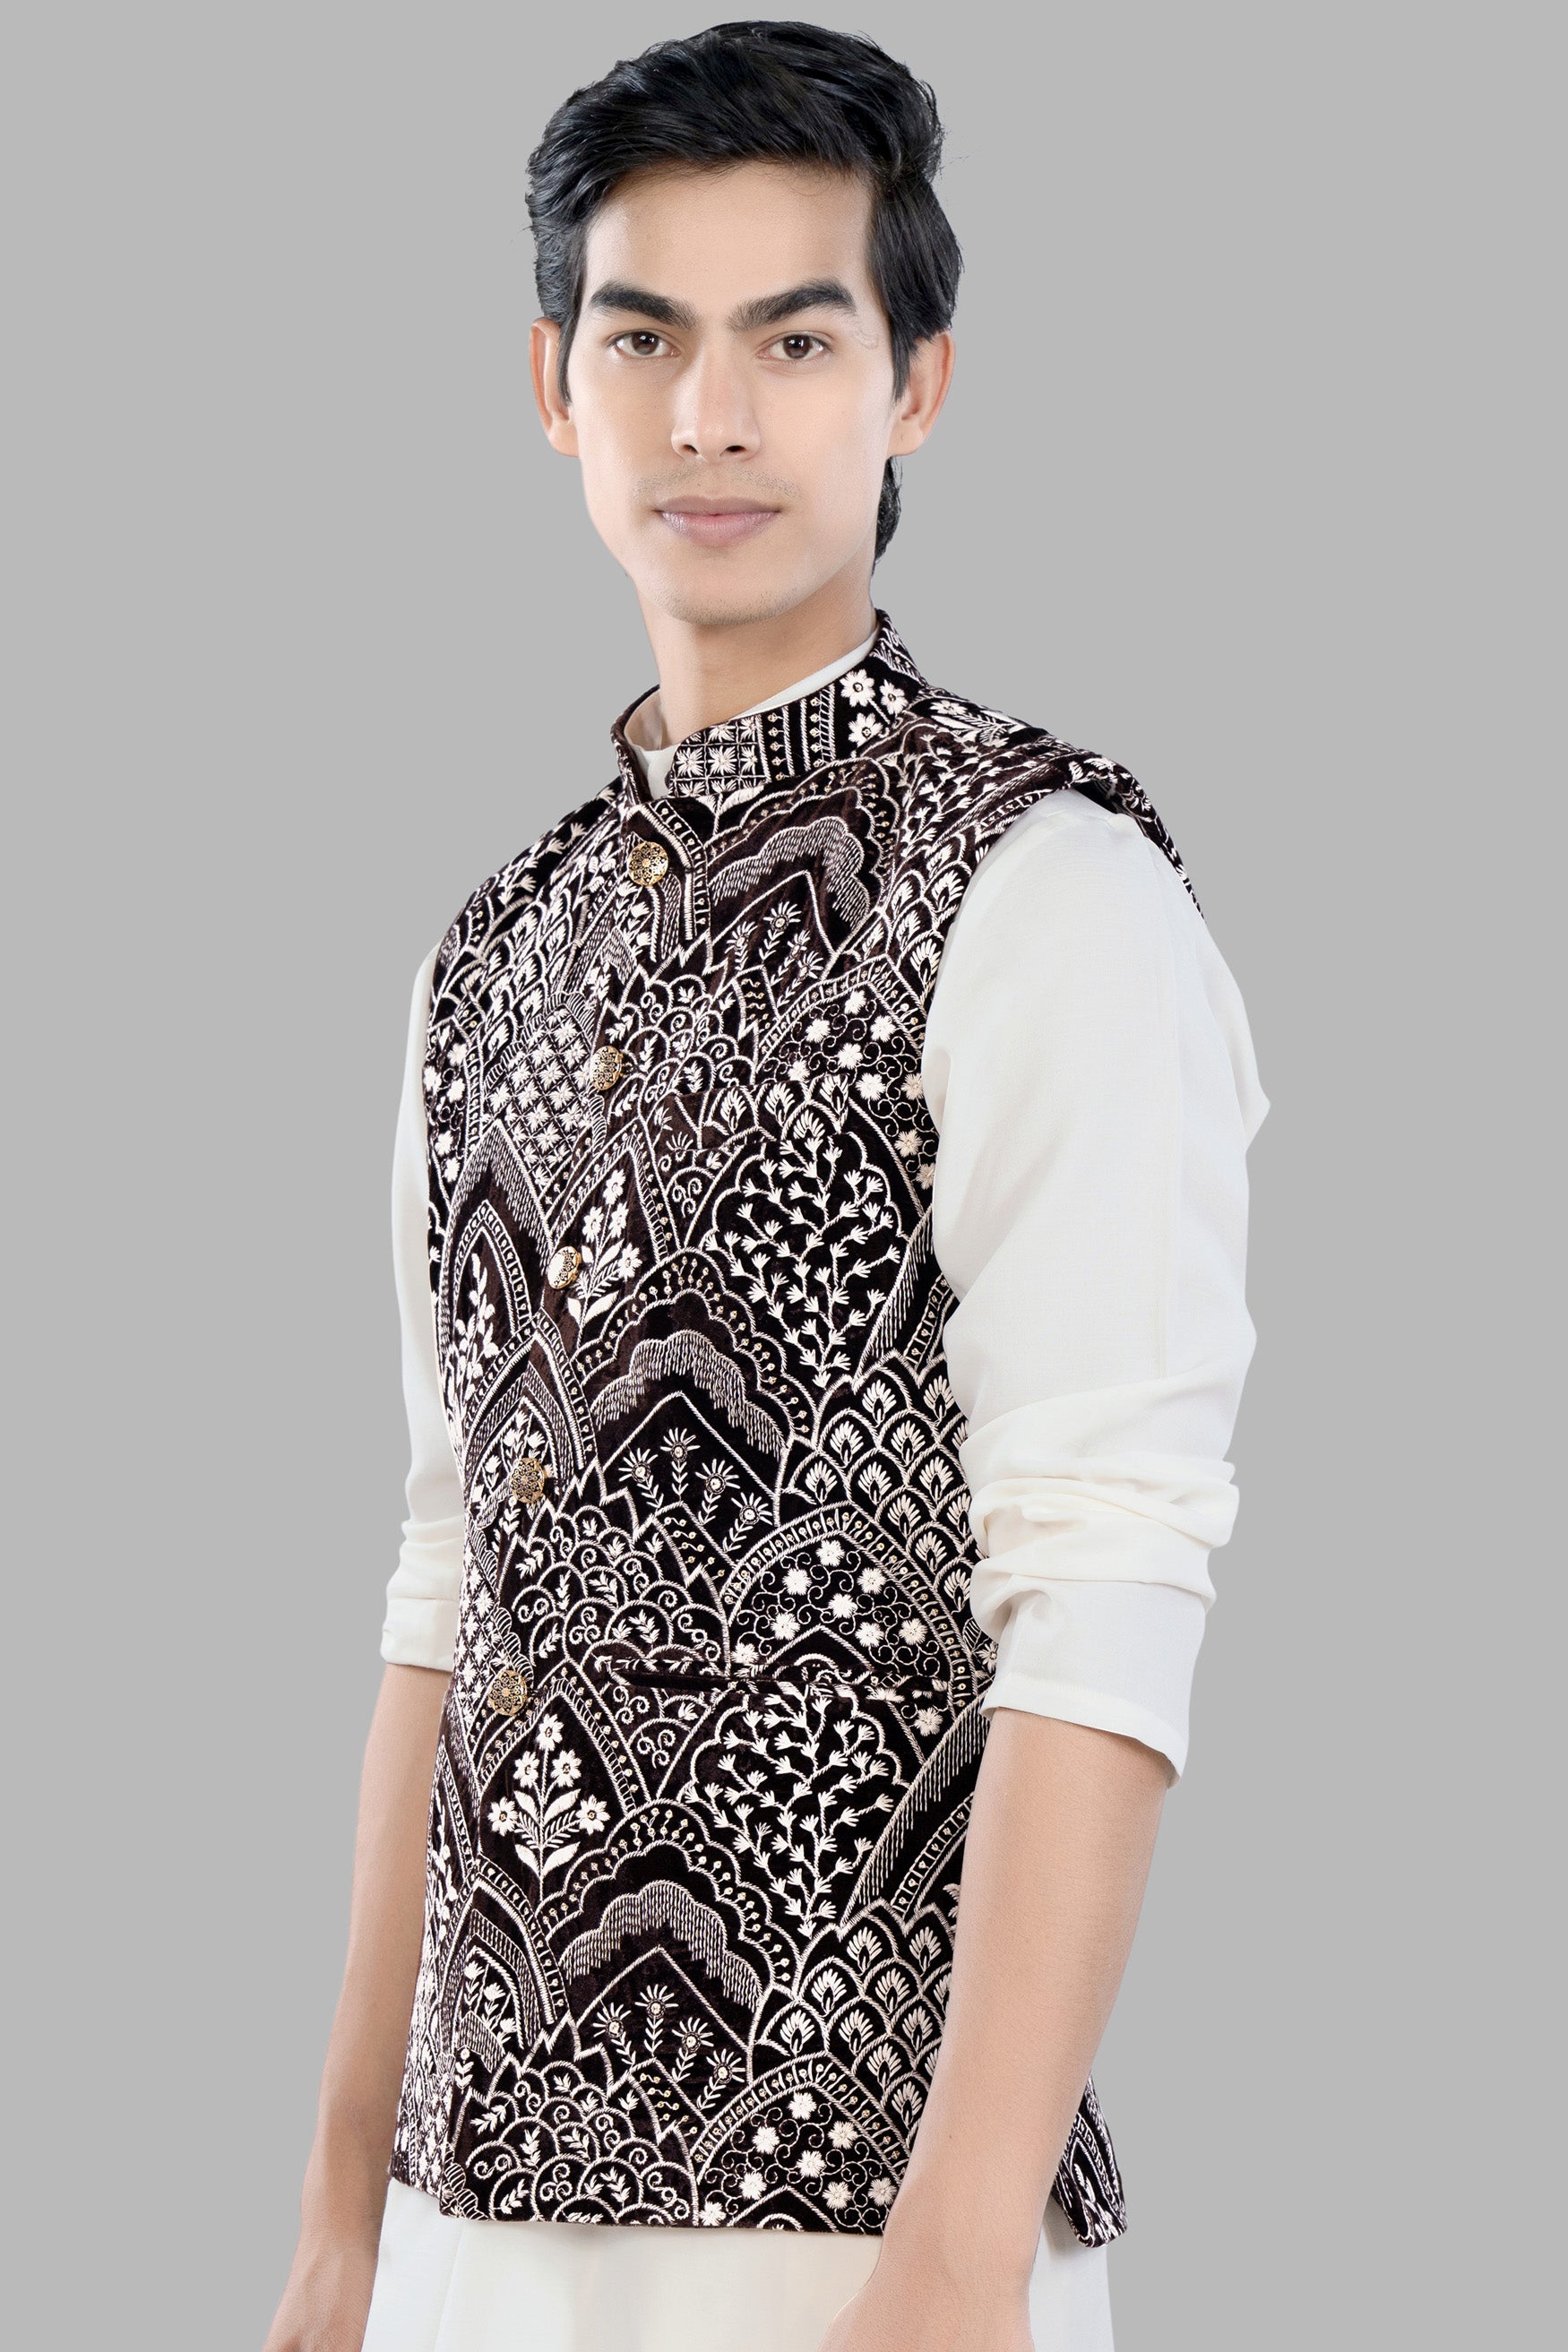 Crater Brown and White Floral Thread Embroidered Designer Nehru Jacket WC3476-36,  WC3476-38,  WC3476-40,  WC3476-42,  WC3476-44,  WC3476-46,  WC3476-48,  WC3476-50,  WC3476-52,  WC3476-54,  WC3476-56,  WC3476-58,  WC3476-60